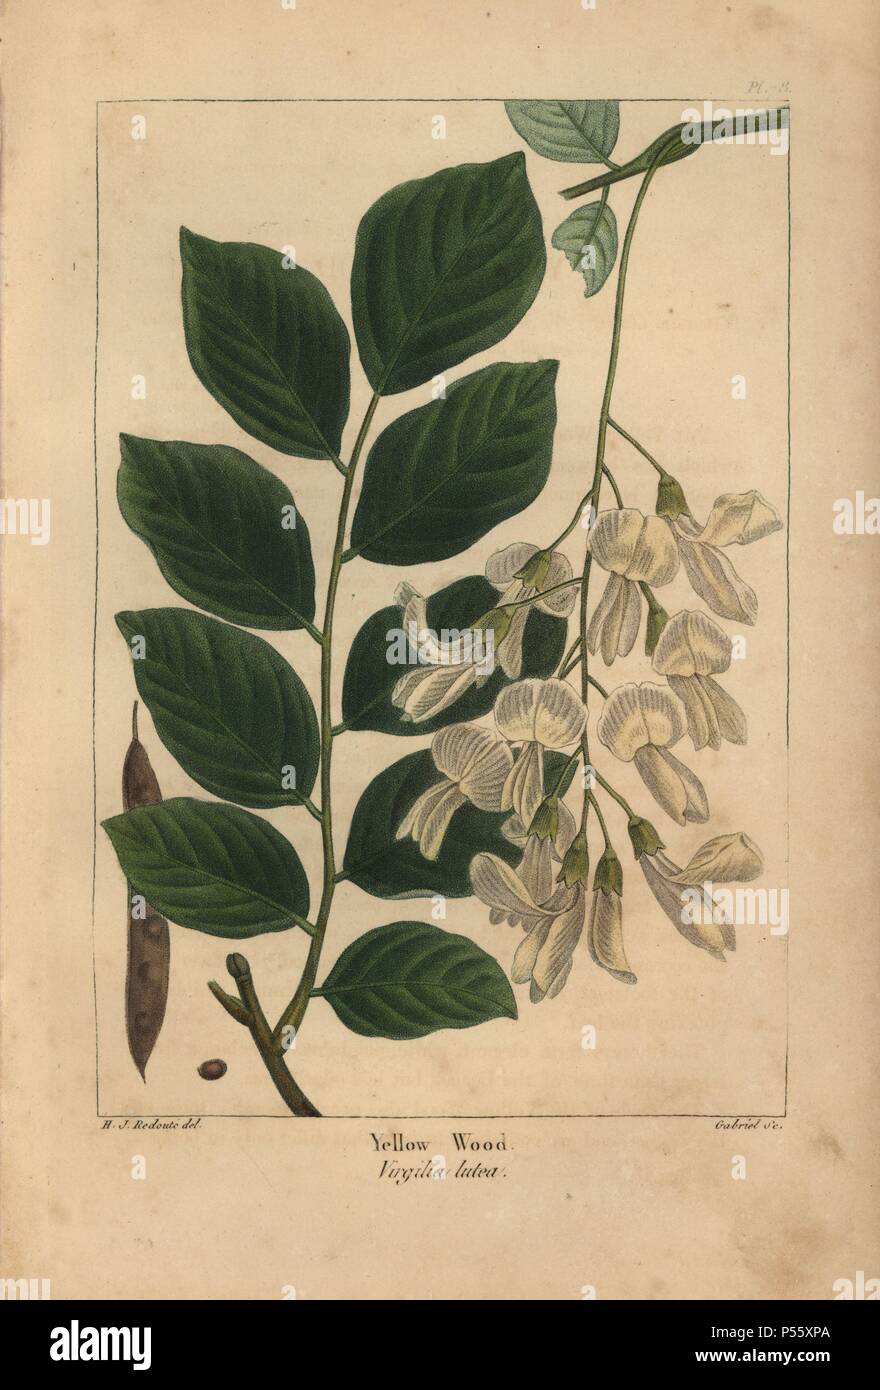 Leaves, flower, pod and seed of the Yellow wood, Virgilia lutea, Cladrastis kentukea. Handcolored stipple engraving from a botanical illustration by Henri Joseph Redoute, engraved on copper by Gabriel, from Francois Andre Michaux's 'North American Sylva,' Philadelphia, 1857. French botanist Michaux (1770-1855) explored America and Canada in 1785 cataloging its native trees. Stock Photo